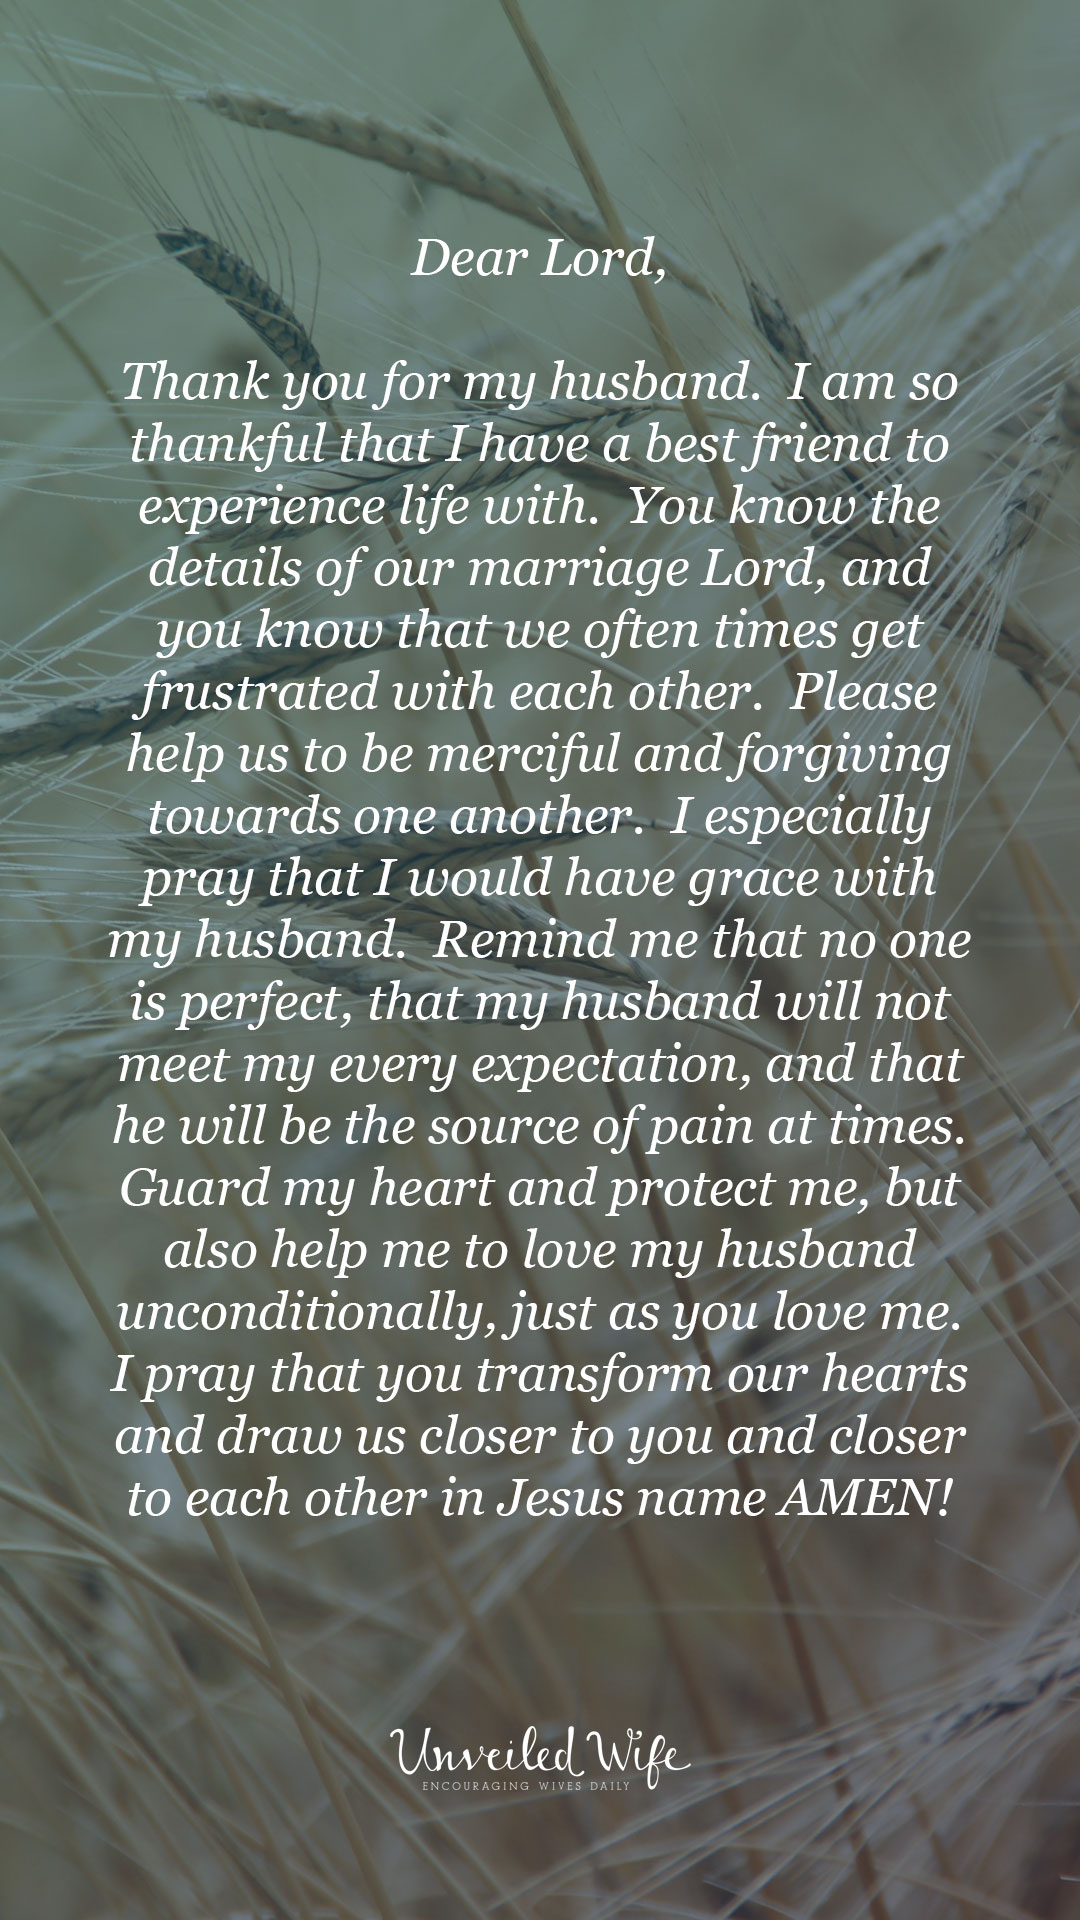 Prayer Of The Day : Grace With My Husband